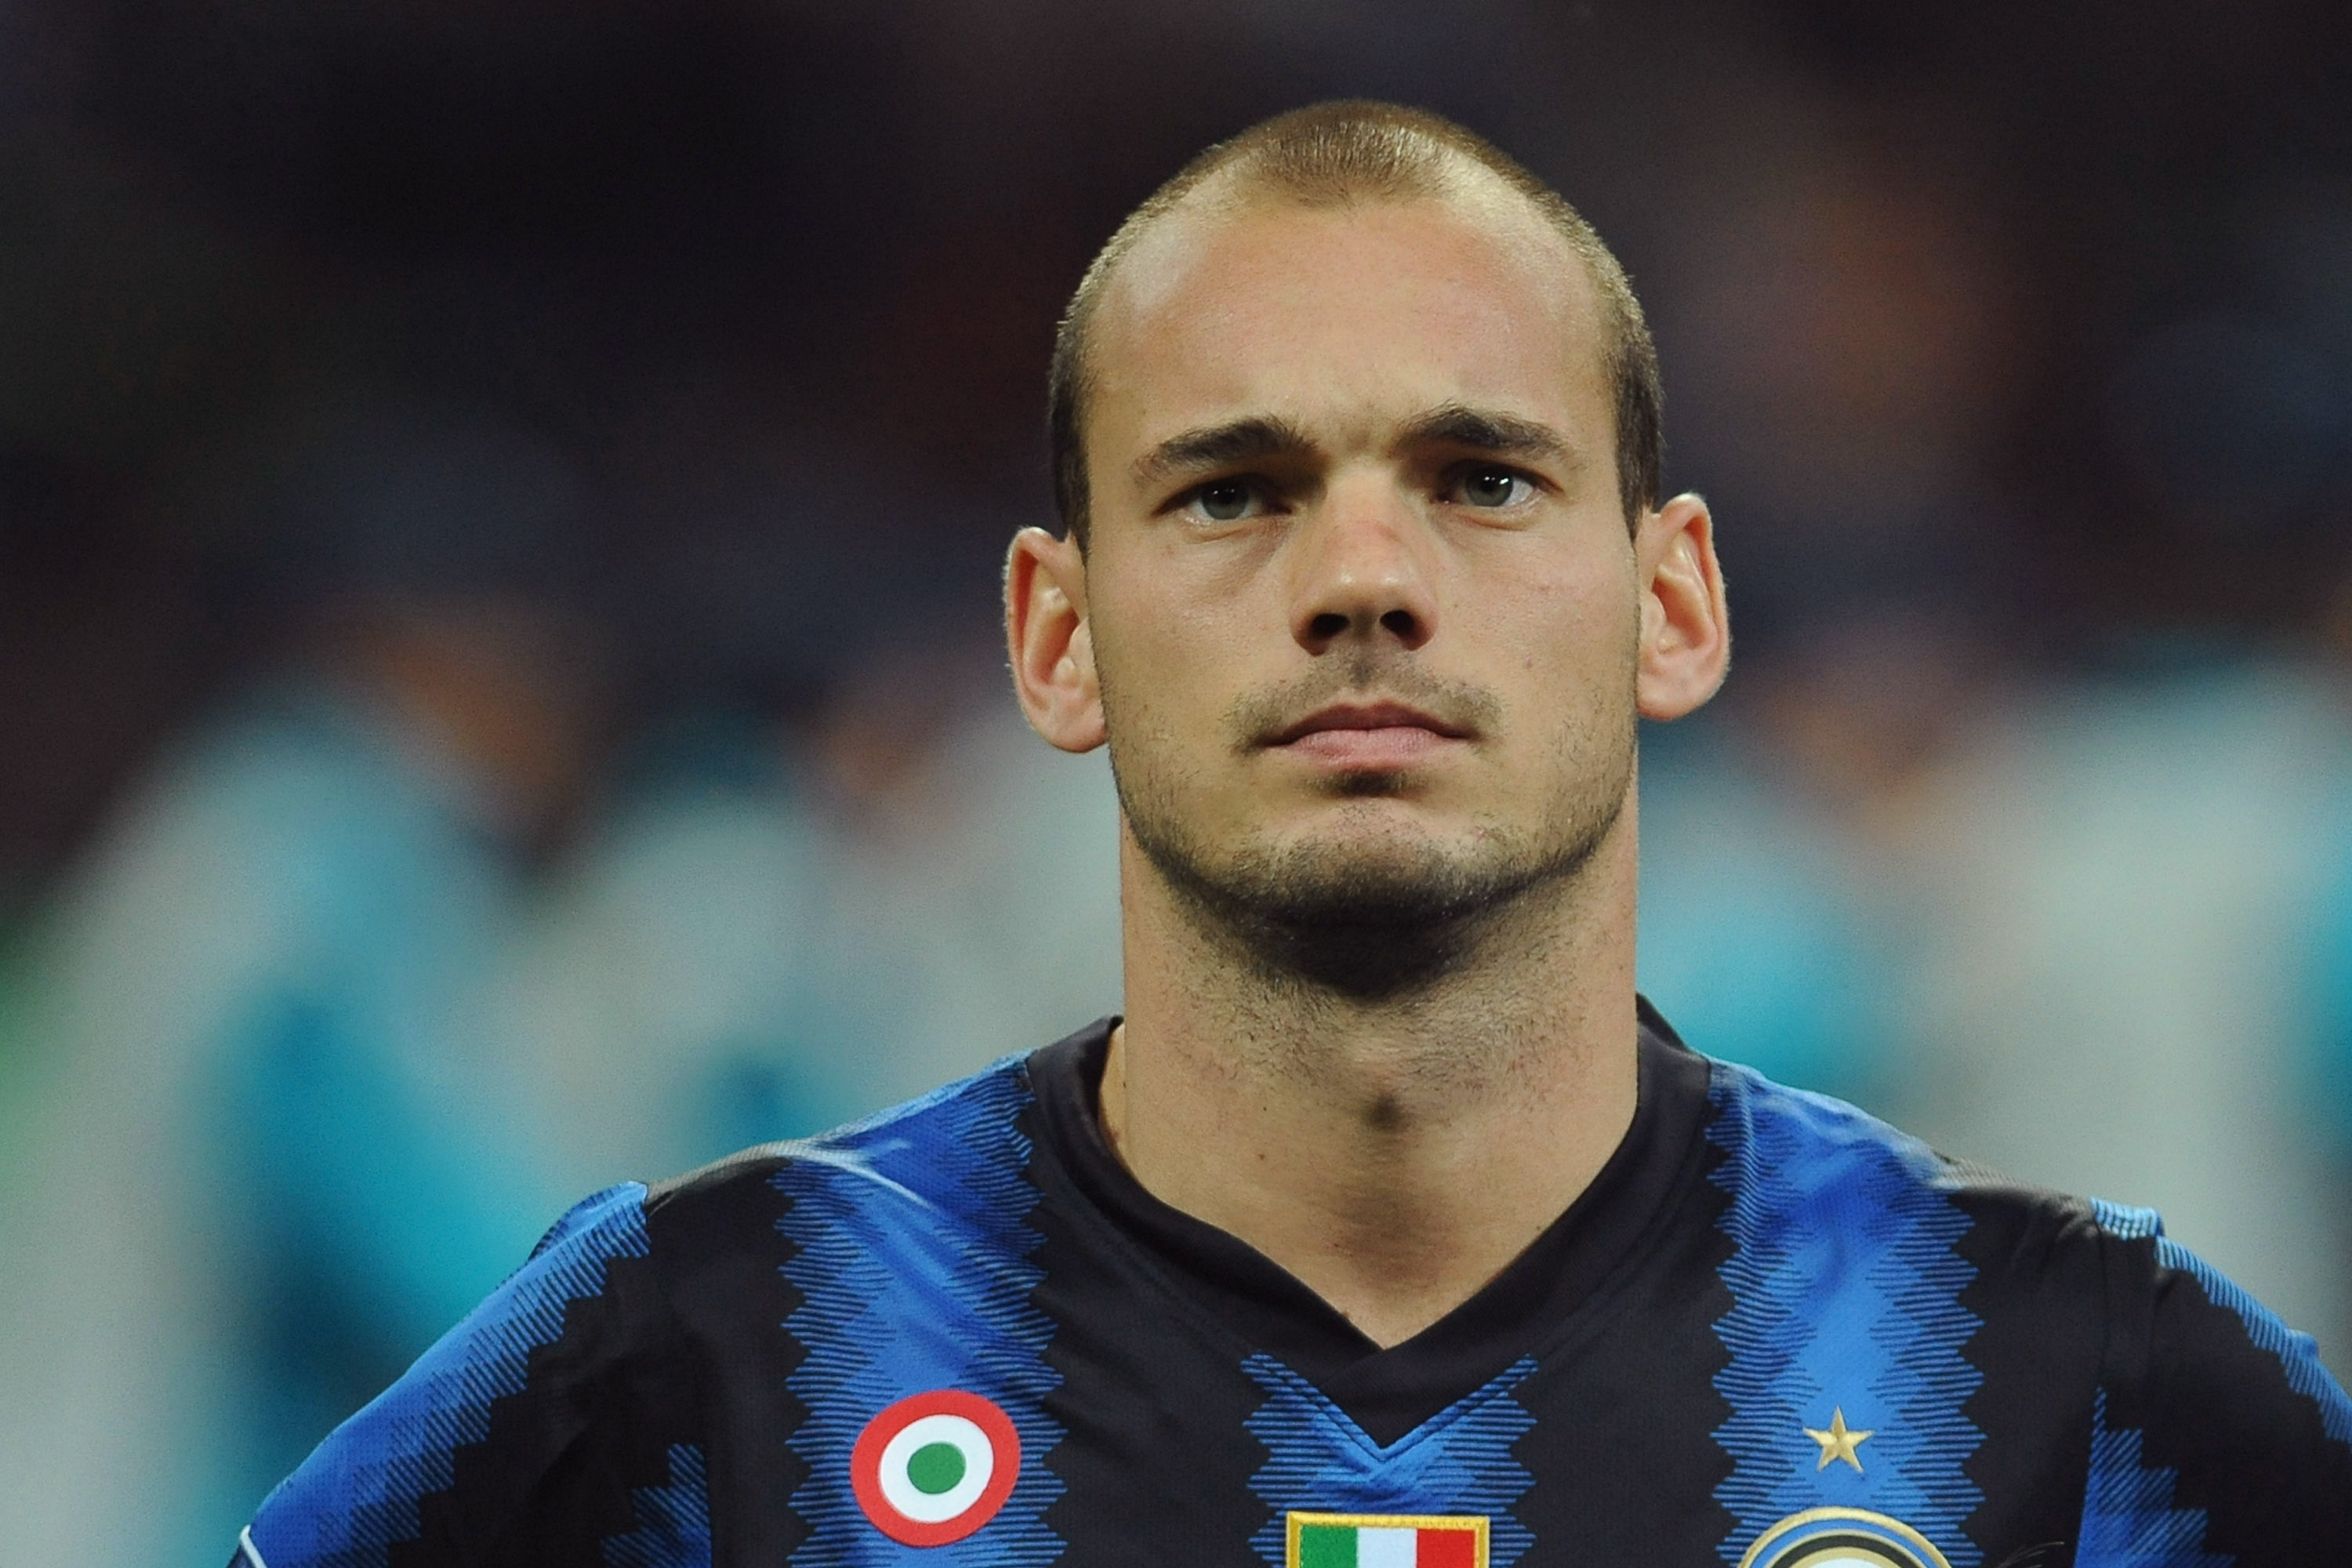 MILAN, ITALY - SEPTEMBER 29:  Wesley Sneijder of FC Internazionale Milano looks on during the UEFA Champions League group A match between FC Internazionale Milano and SV Werder Bremen at Stadio Giuseppe Meazza on September 29, 2010 in Milan, Italy.  (Phot